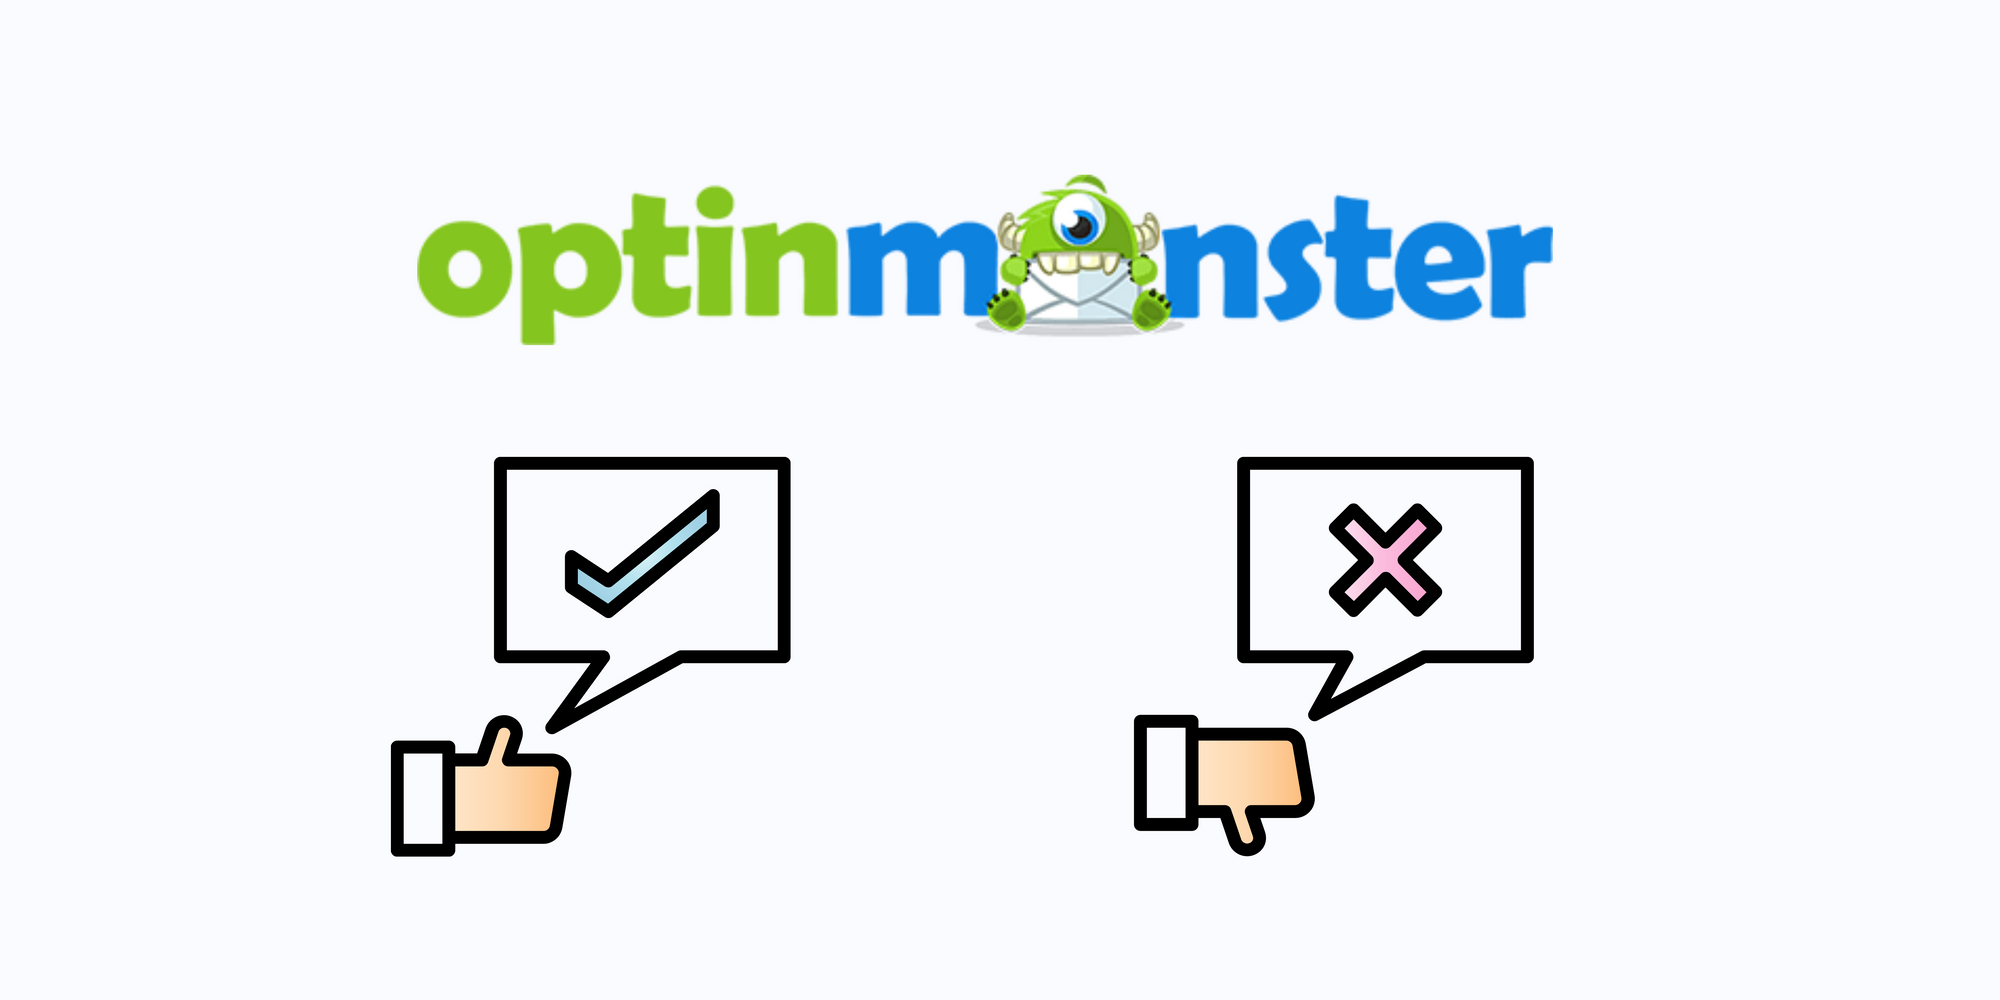 OptinMonster icon, check and x icons with thumbs-up & thumbs-down on light blue background to talk about the pros and cons